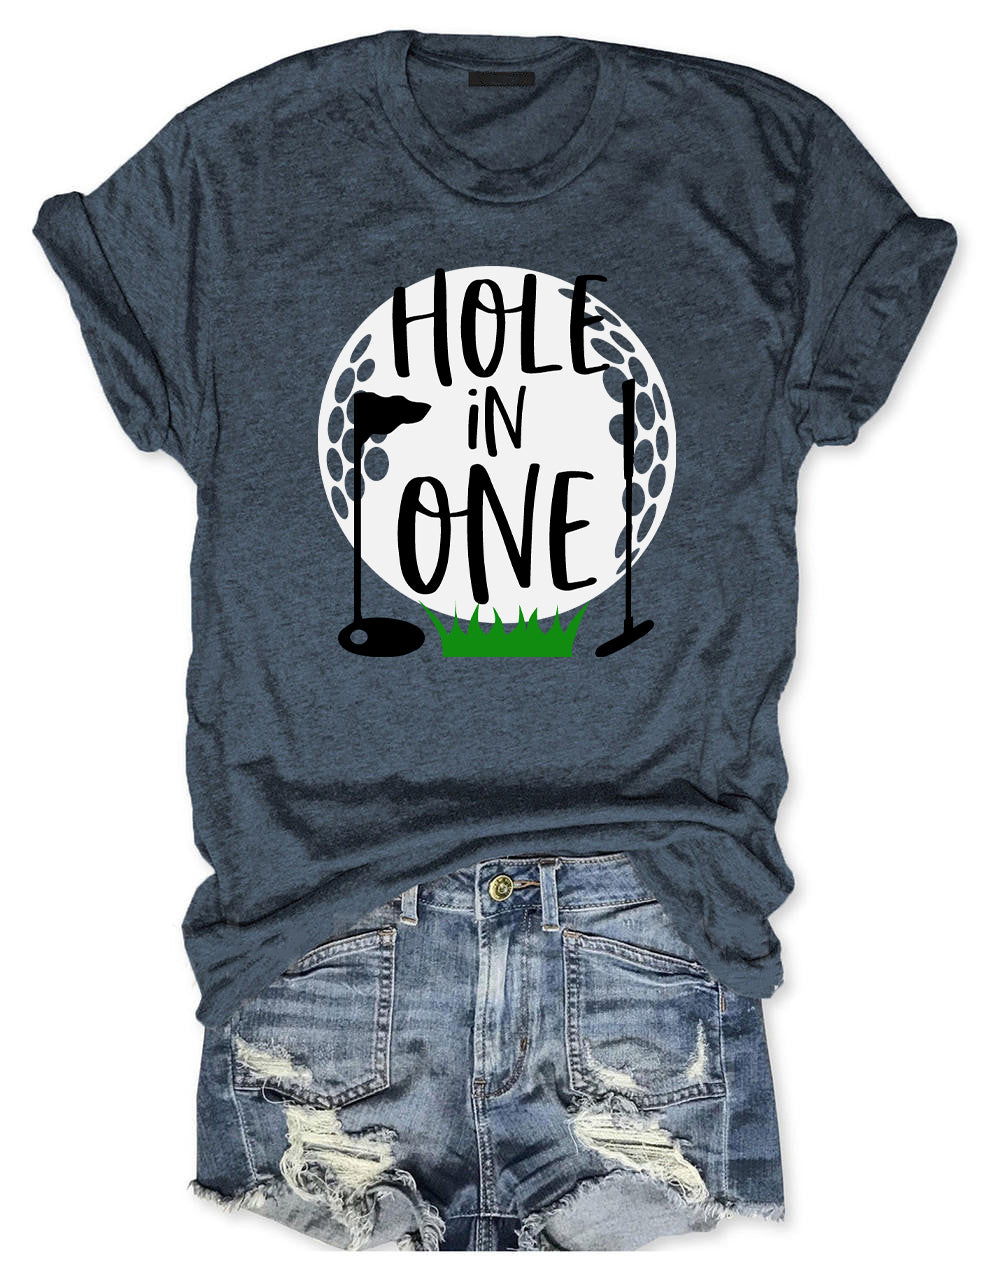 Hole In One Golf T-shirt